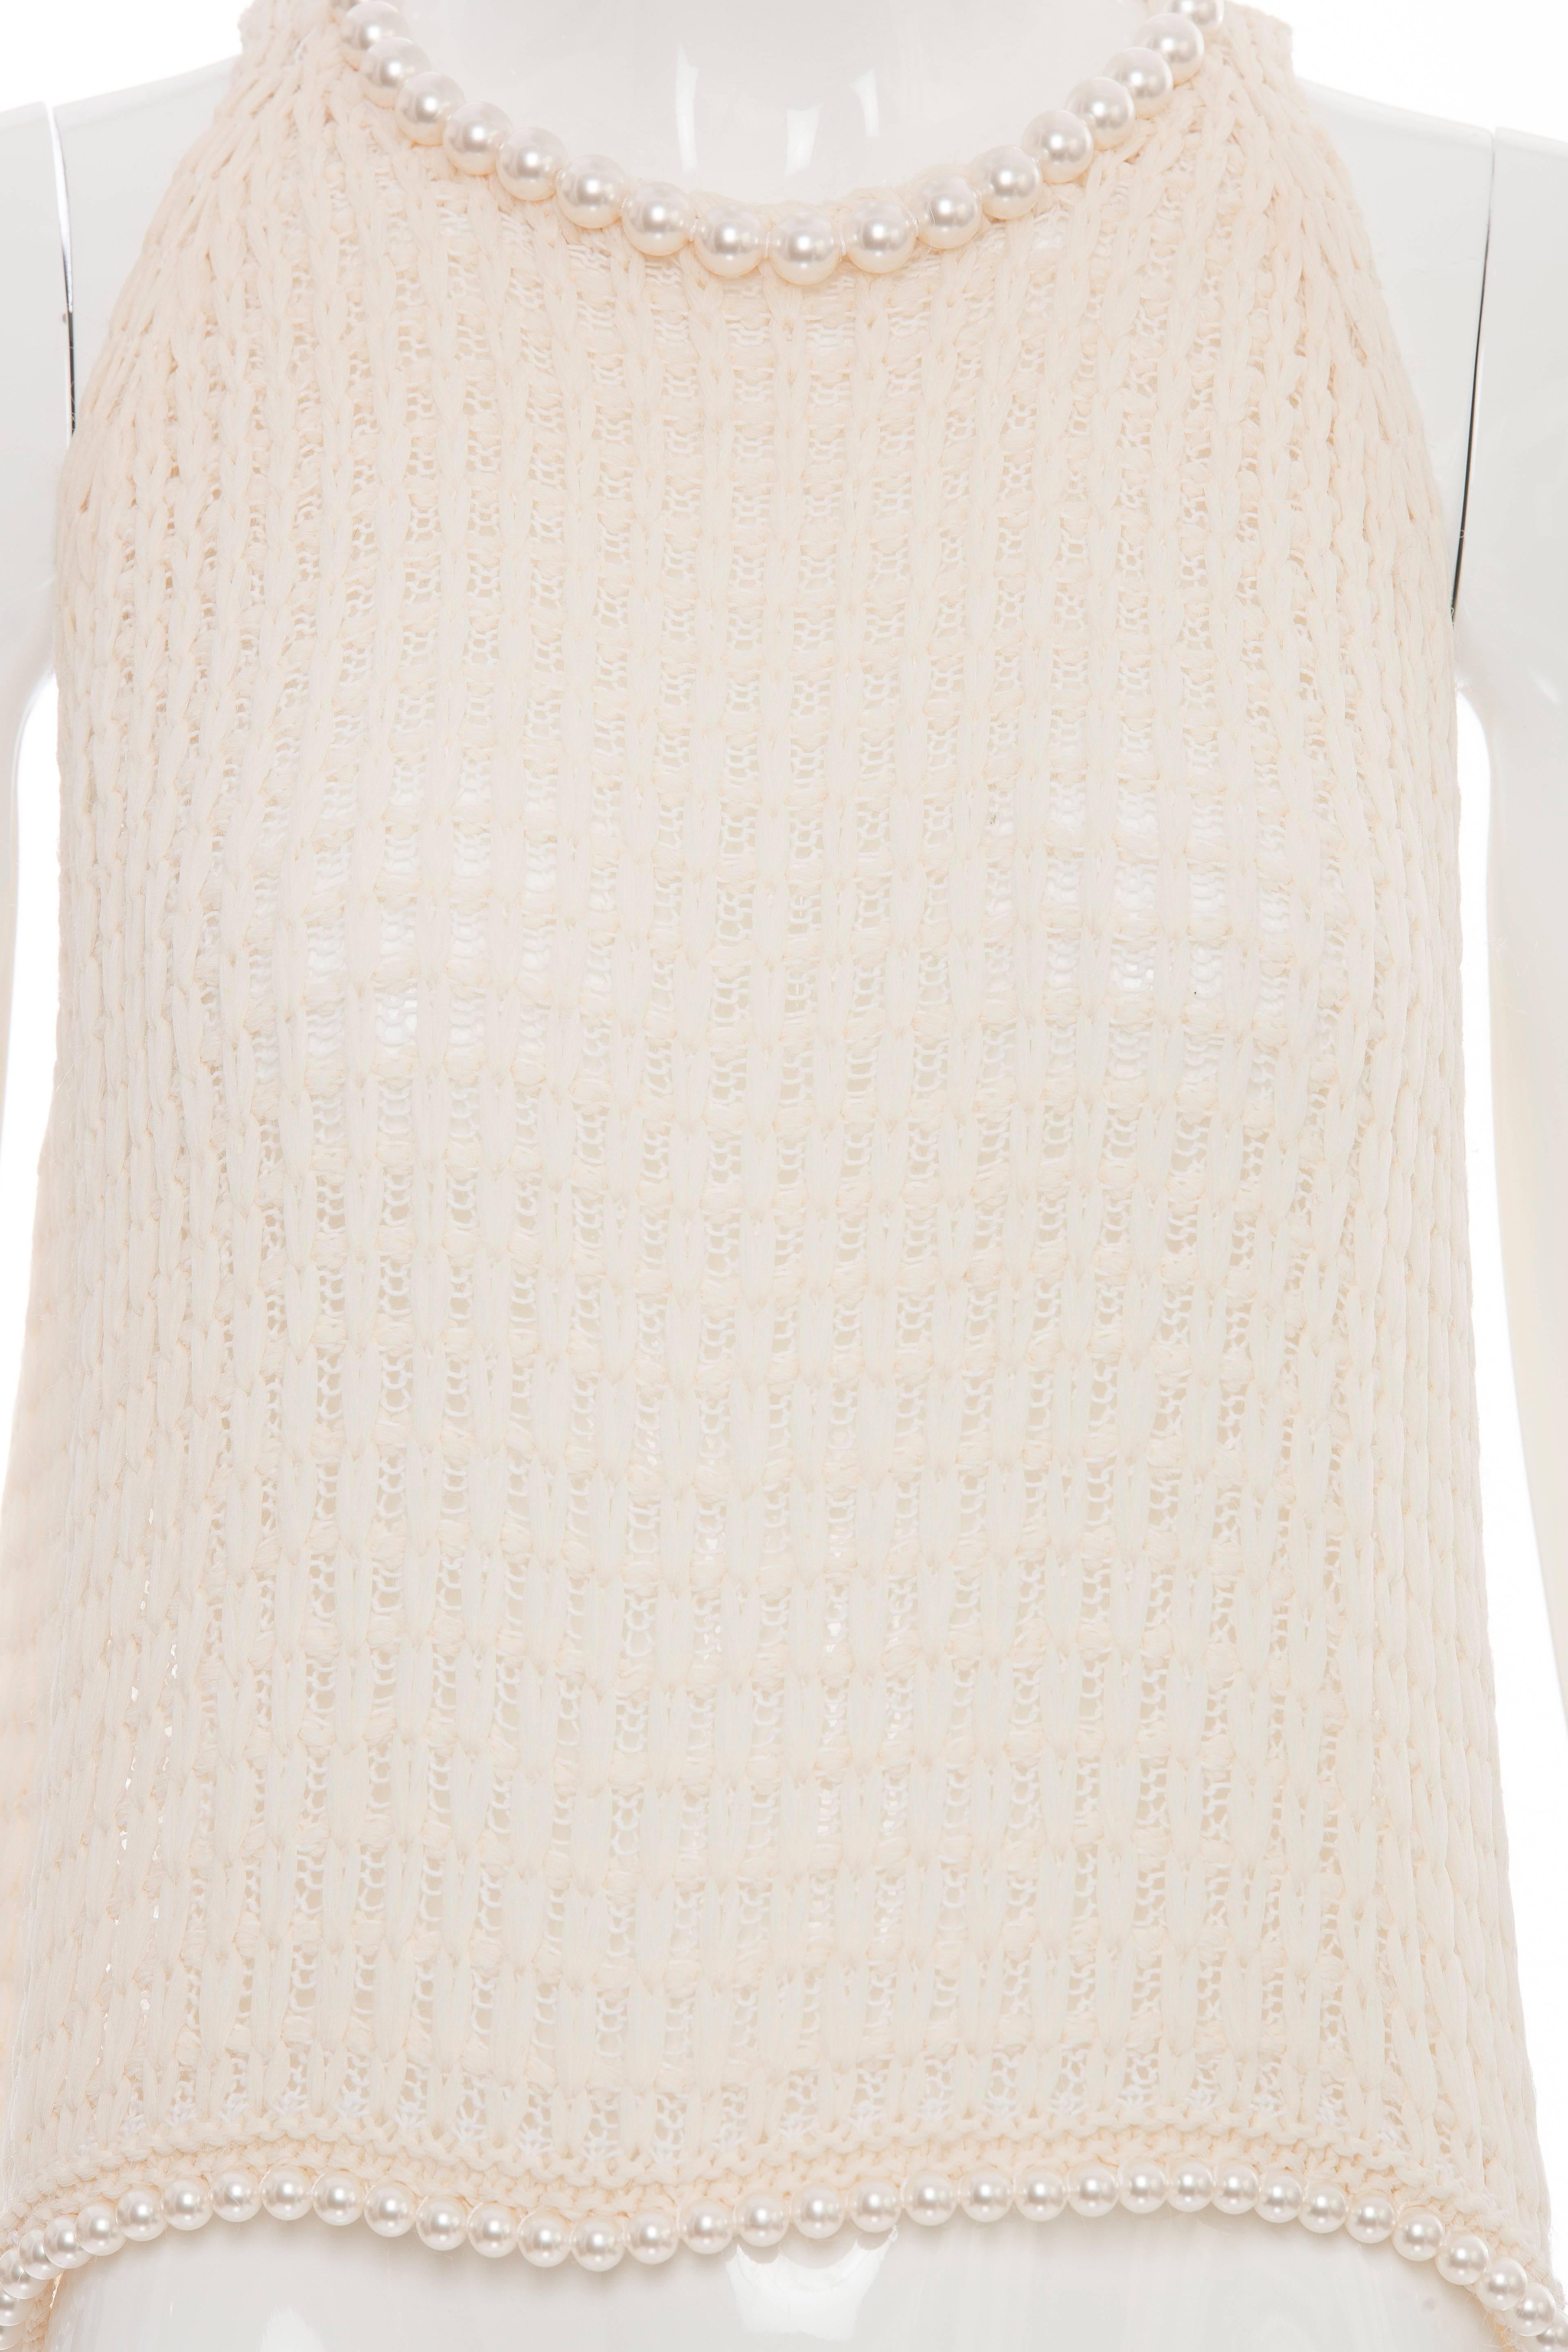 Chanel Cream Silk Blend Open Knit Top With Pearl Embellishments, Spring 2009 1